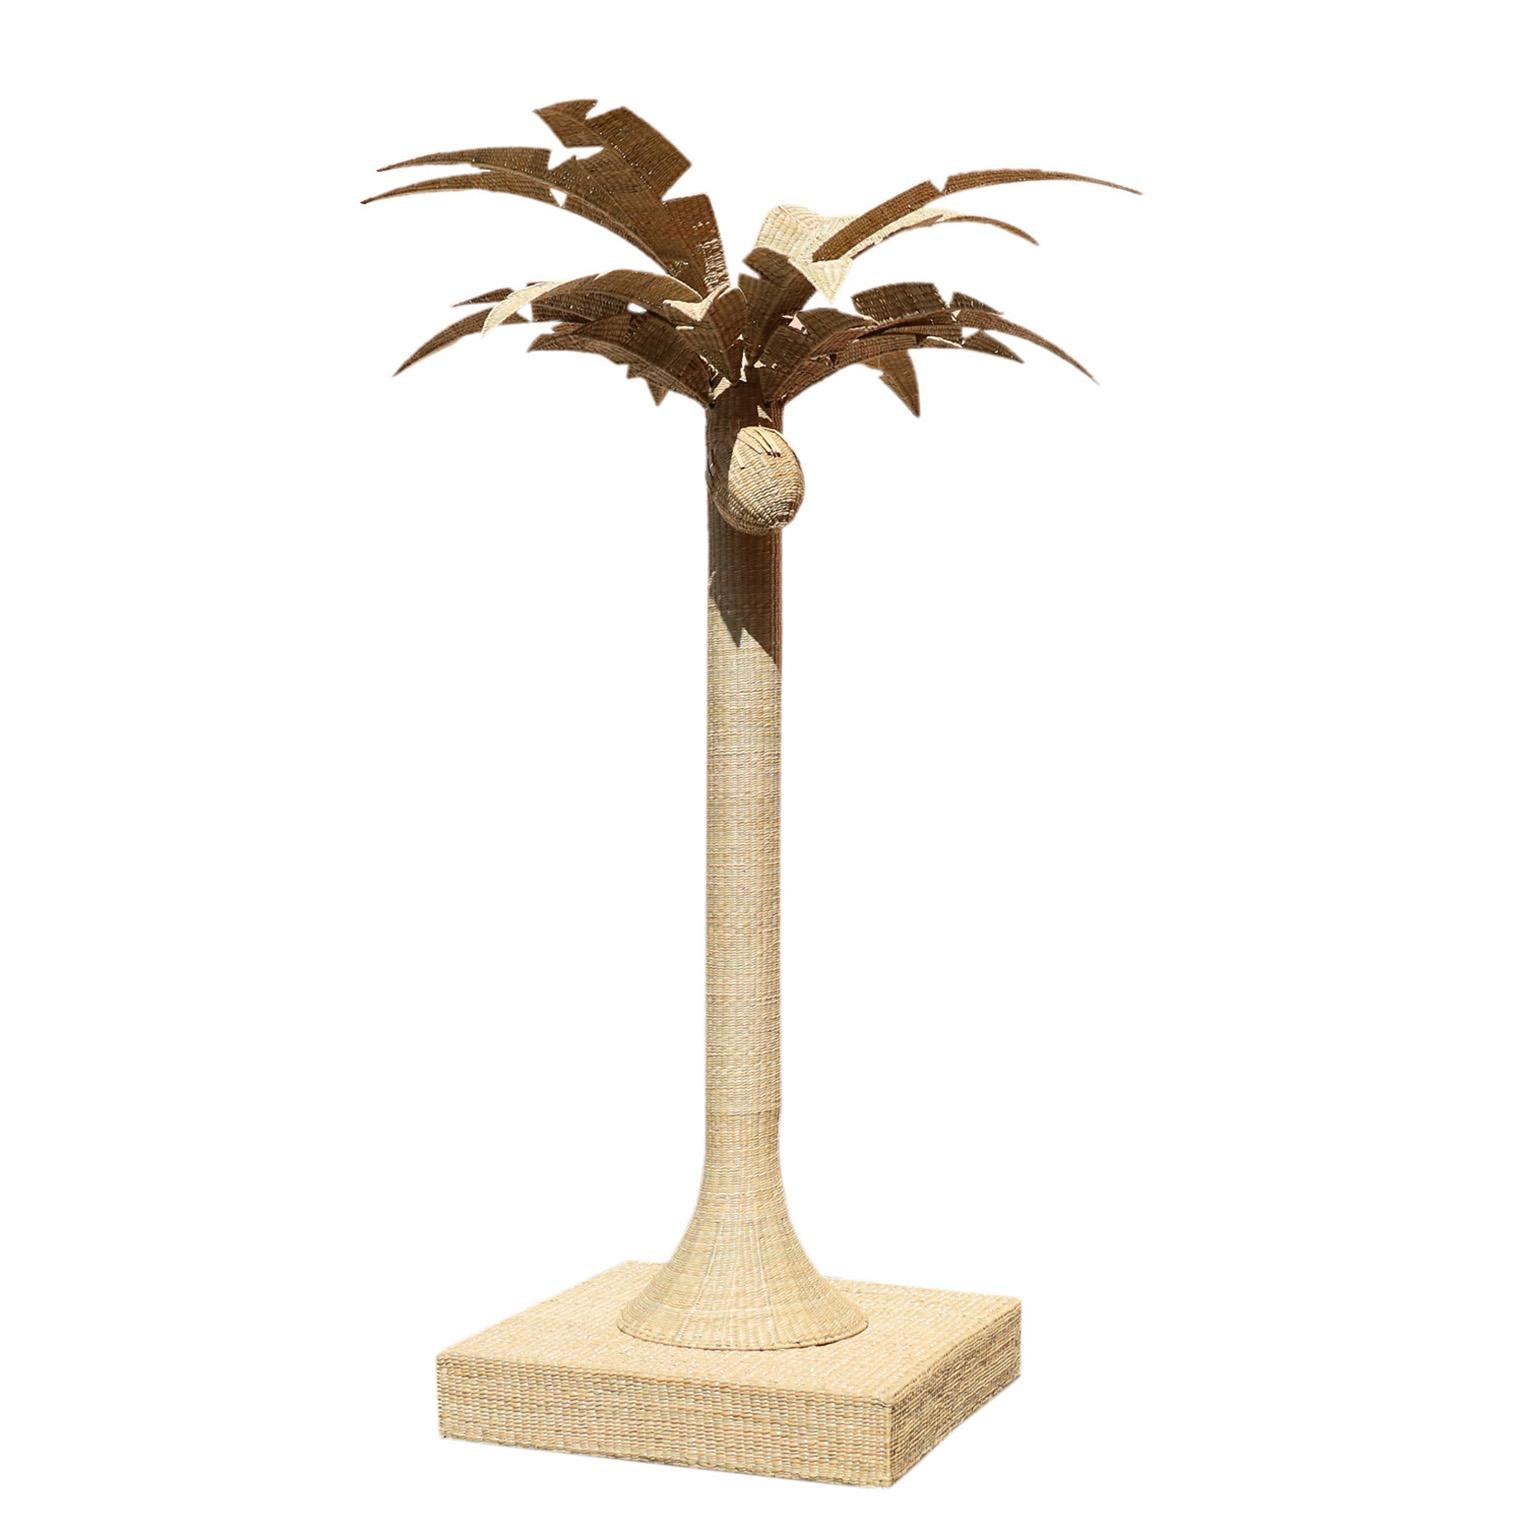 Life size sculpture of a palm tree with a coconut crafted in wicker or reed wrapped over a metal frame with impressive stylized presence. From the FS Flores Collection designed and offered exclusively by F.S. Henemader Antiques.